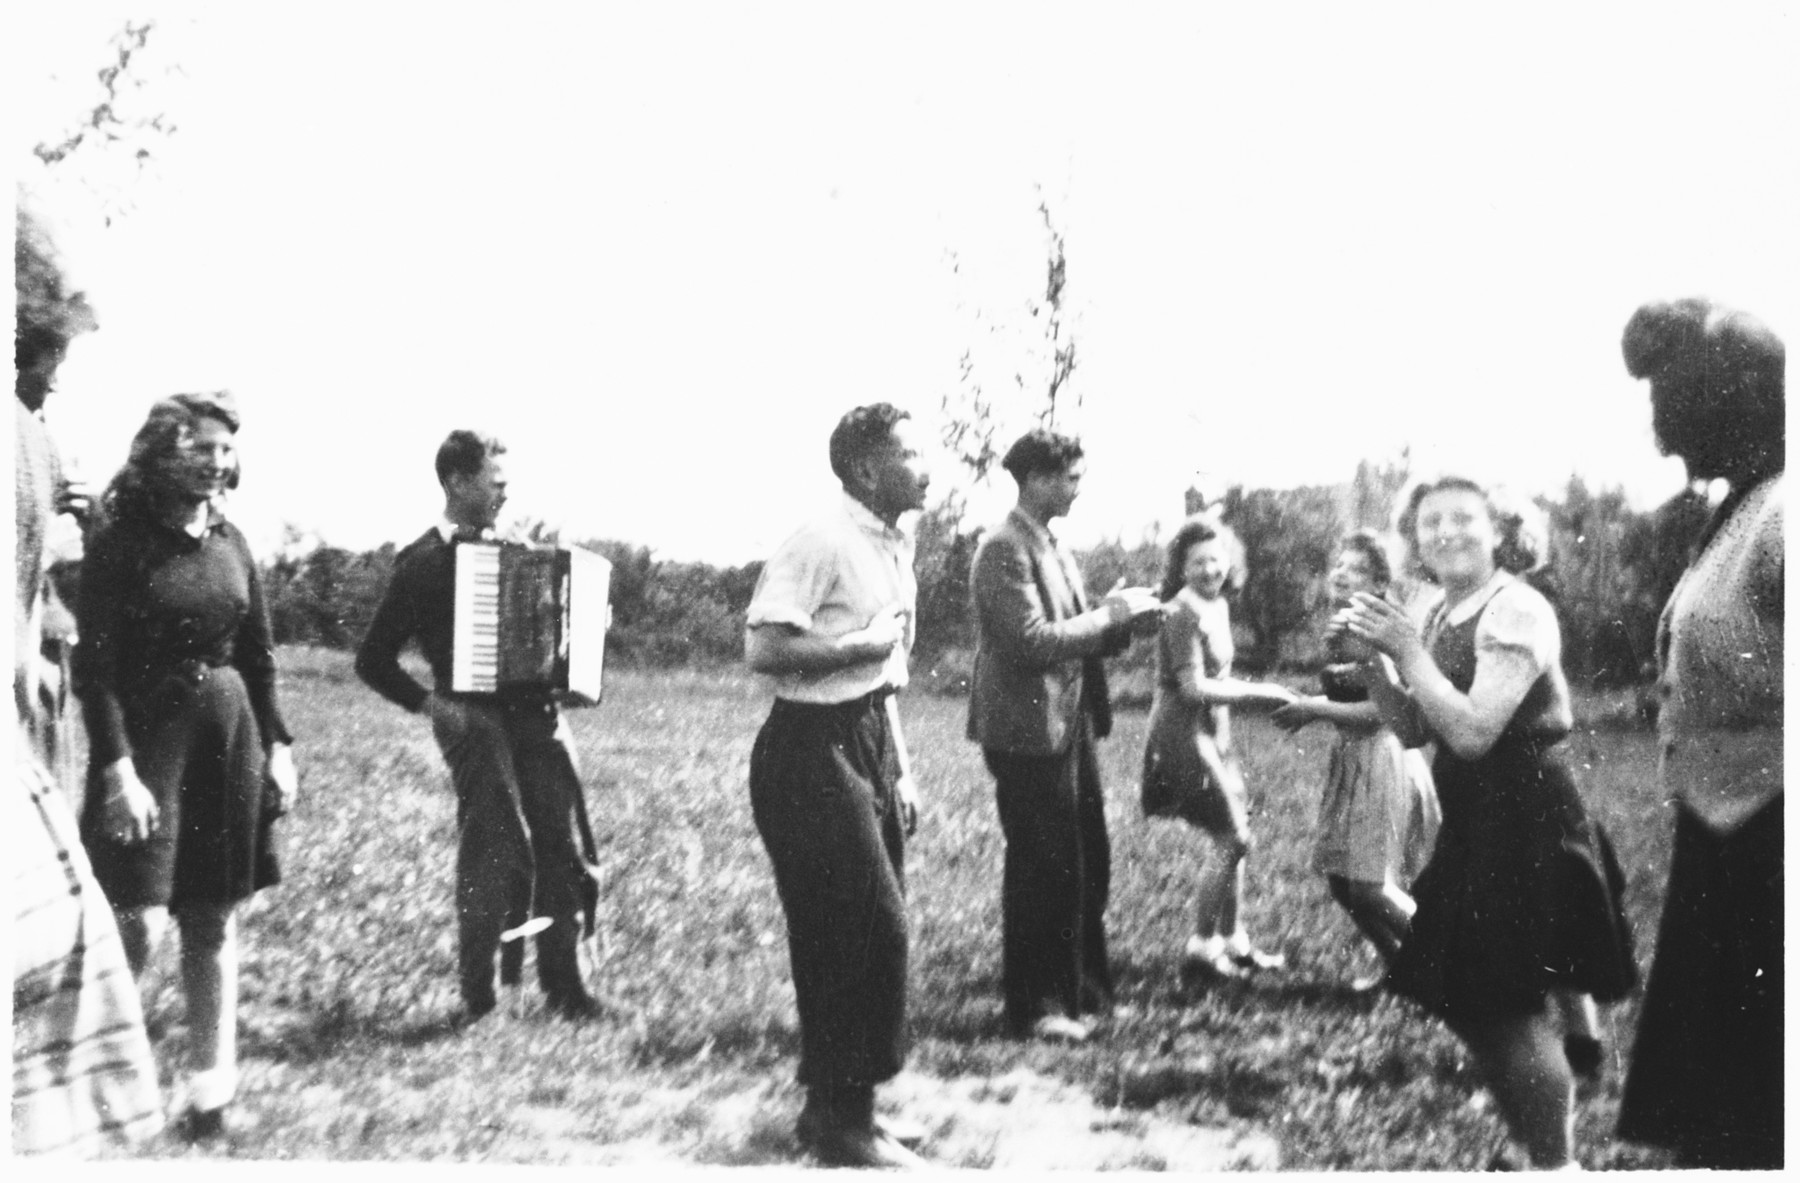 A group of Jewish DP youth dance to an accordion outside the Poulouzat children's home. 

Among those pictured are Herbert Karliner (third from the left in the foreground) and Felix Rosenrib (fourth from the left).